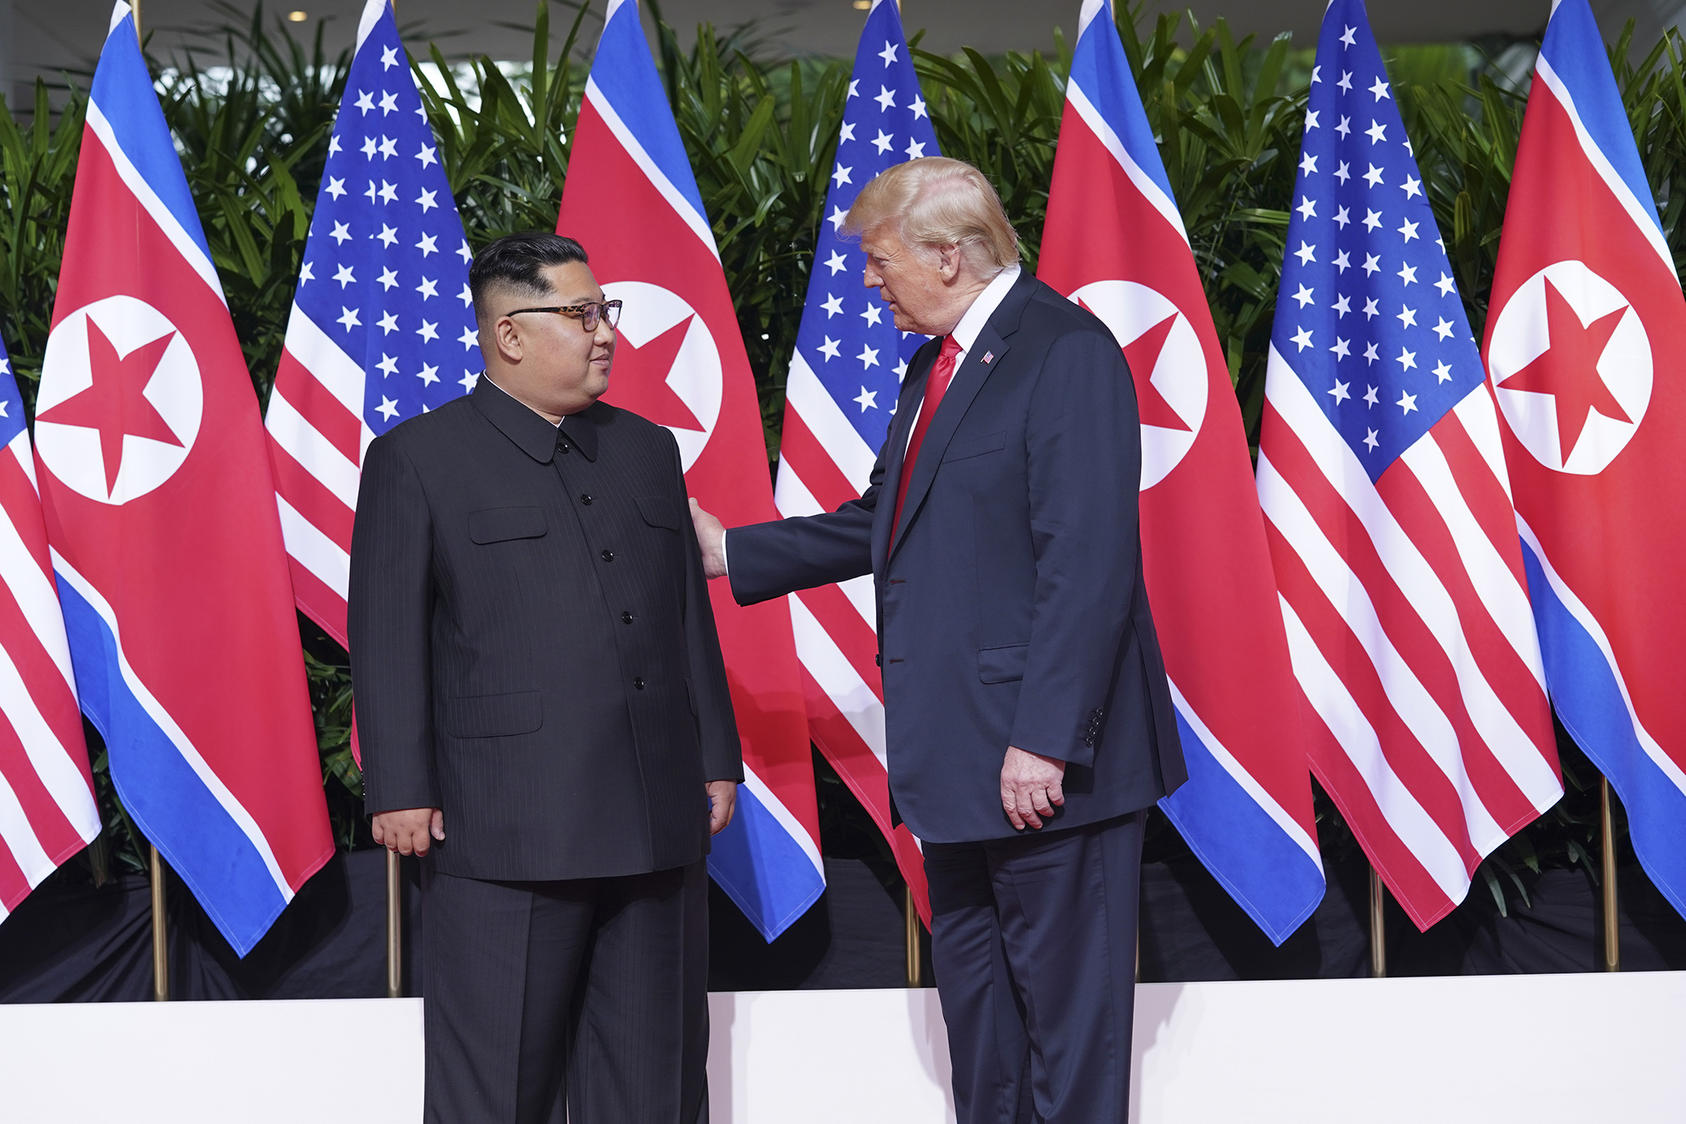 President Donald Trump and Kim Jong Un during their summit in Singapore, June 12, 2018. The White House announced on Jan. 18, 2019 that Trump would meet for a second time with the North Korean leader, continuing a high-level diplomatic dialogue that has eased tensions but shown little progress in eliminating the North’s nuclear arsenal. (Doug Mills/The New York Times)